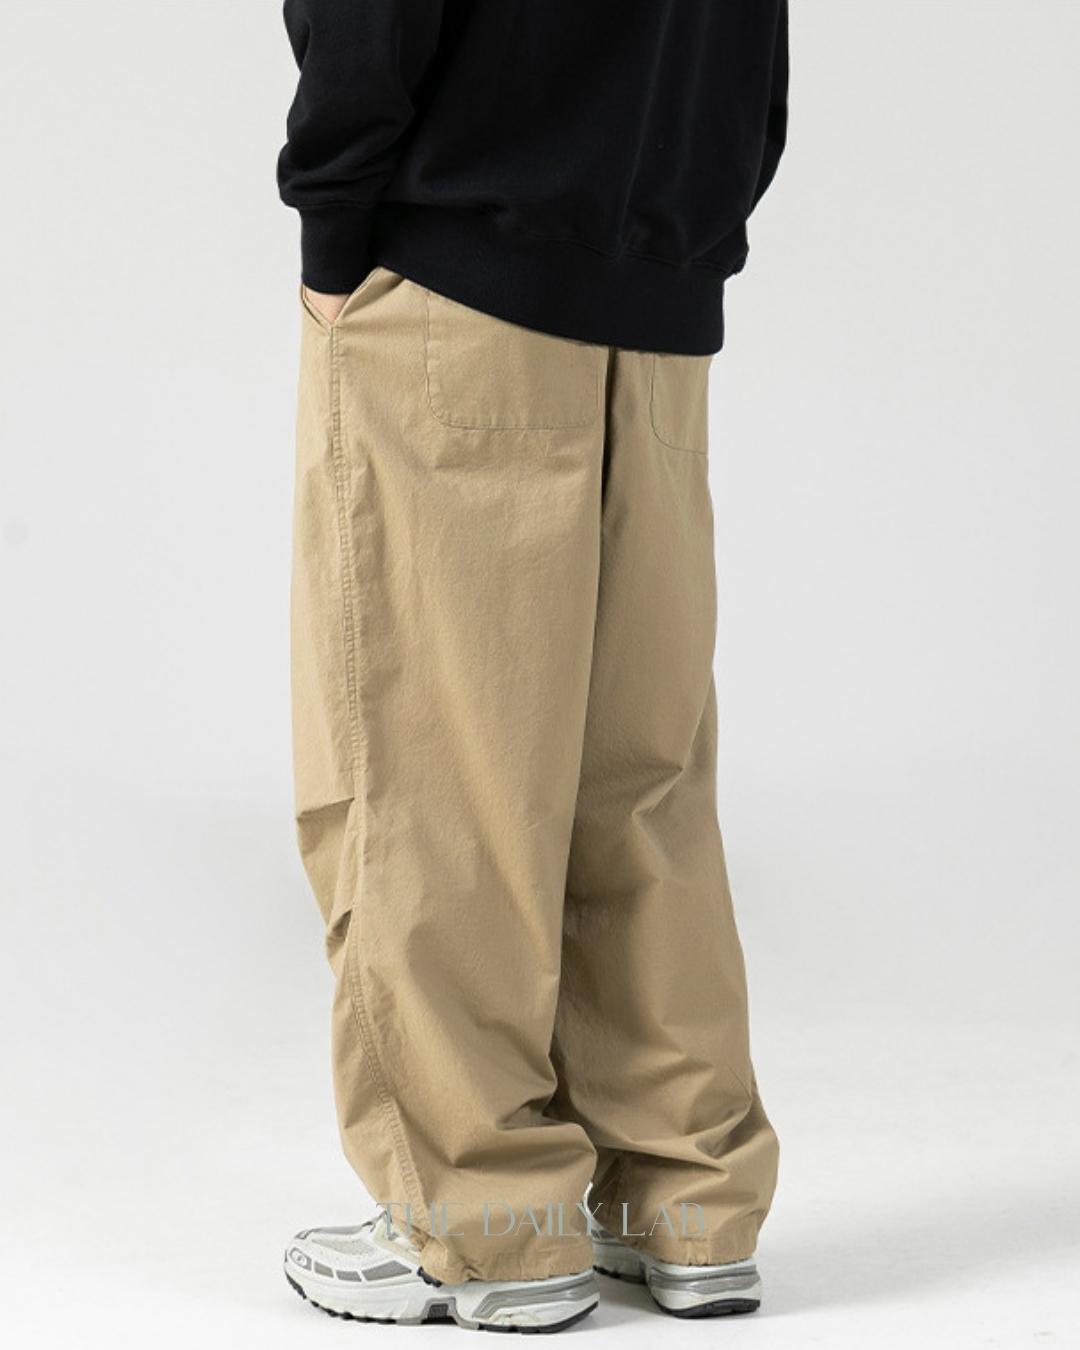 Vintage Loose Fit Casual Long Pants in Khaki – The Daily Lab